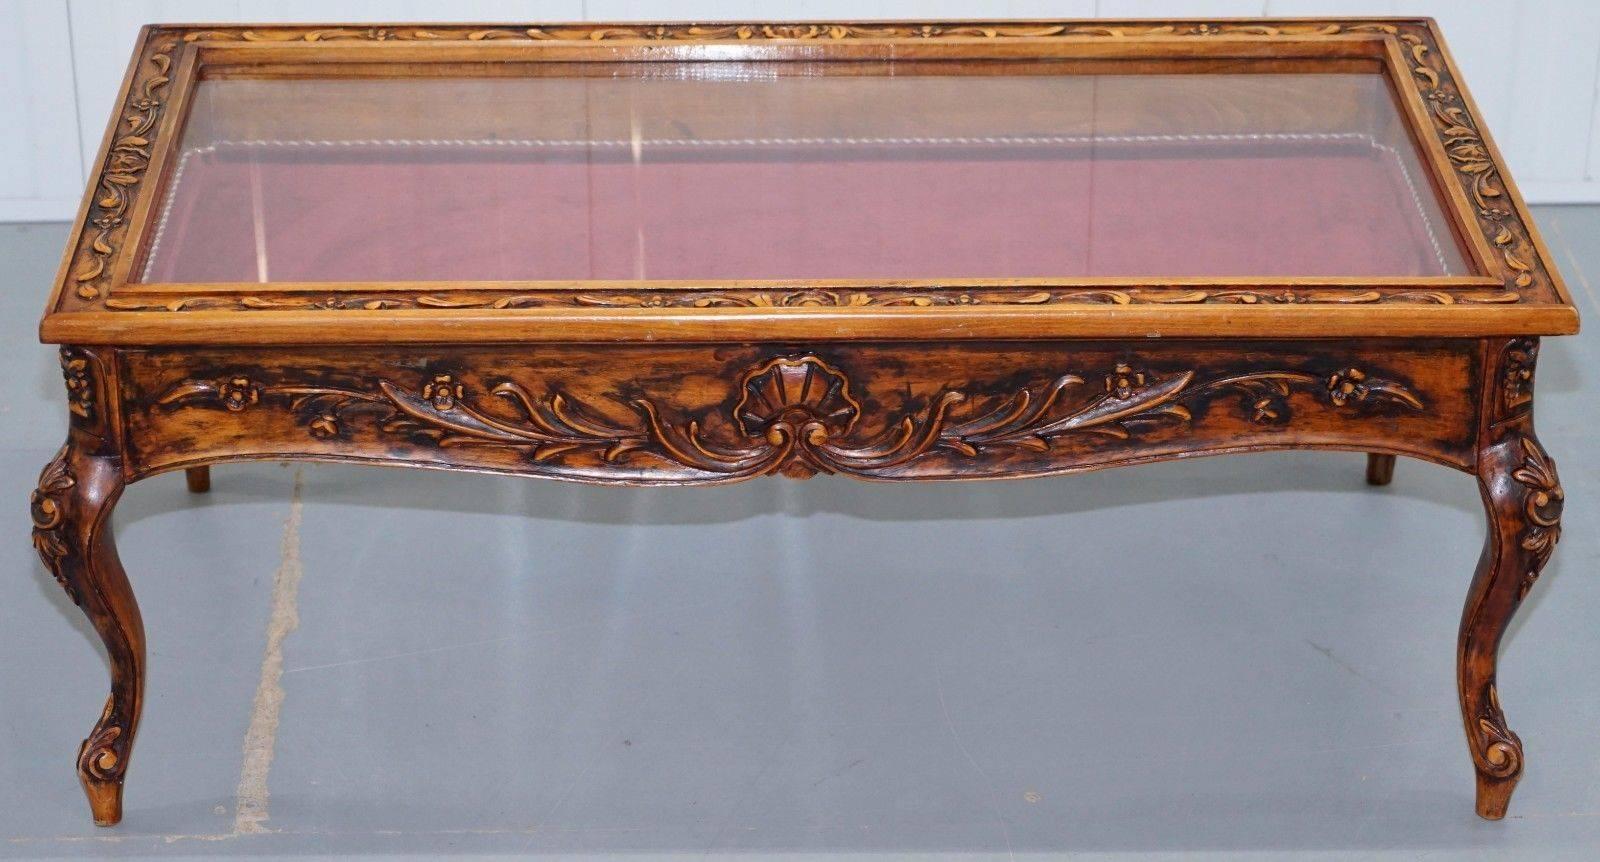 We are delighted to offer for sale this lovely vintage solid carved wood display case coffee table and matching side table with red velvet interior

Great functional pieces that offer lots of storage, just imagine your collection of whatever